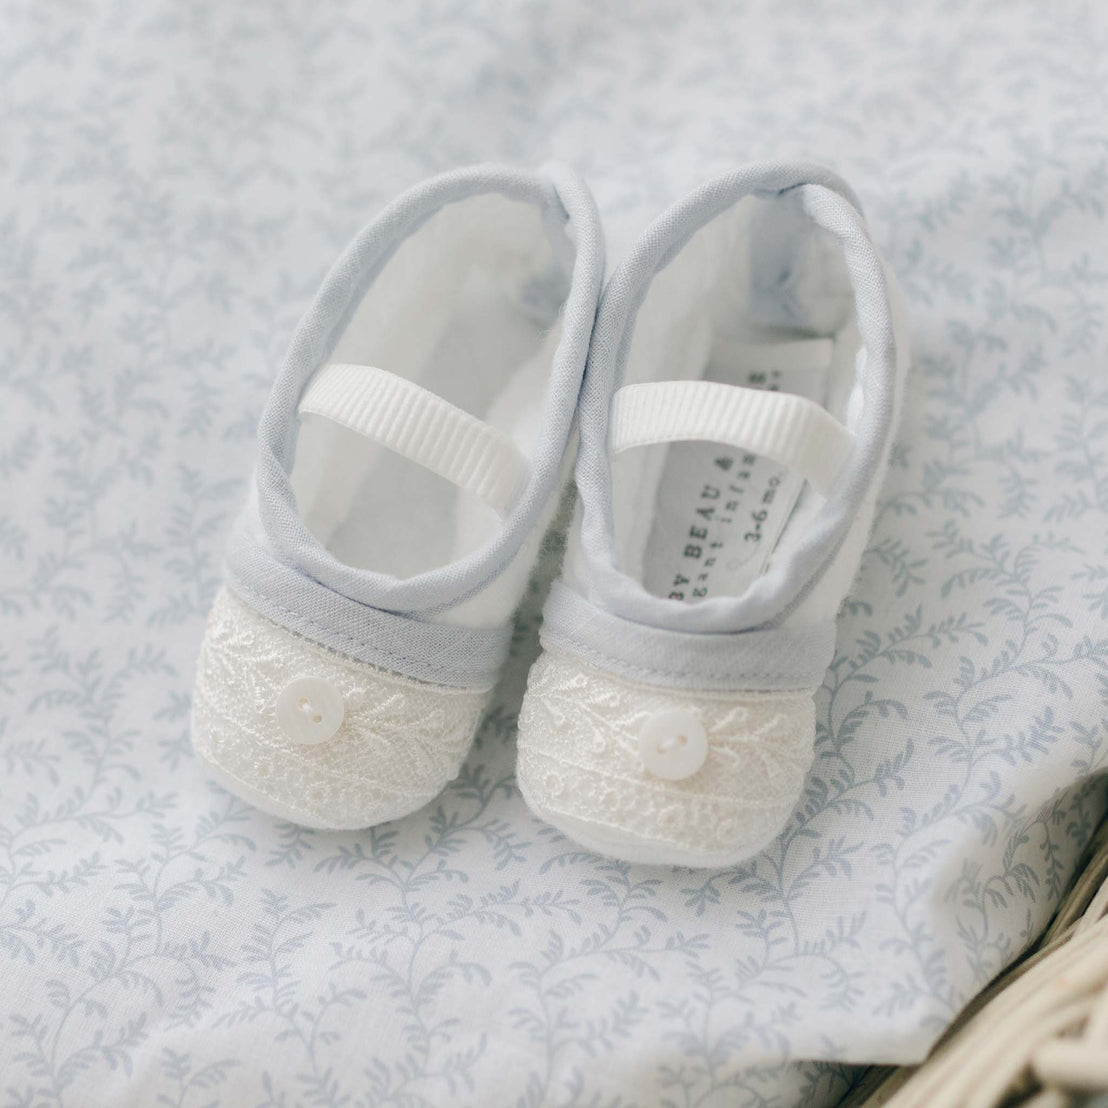 The Harrison Booties, a pair of baby shoes handmade in the USA, feature white lace and button details on the toes, with gray fabric and white straps across the top. They are elegantly displayed on a light blue patterned cloth and make a perfect heirloom gift.